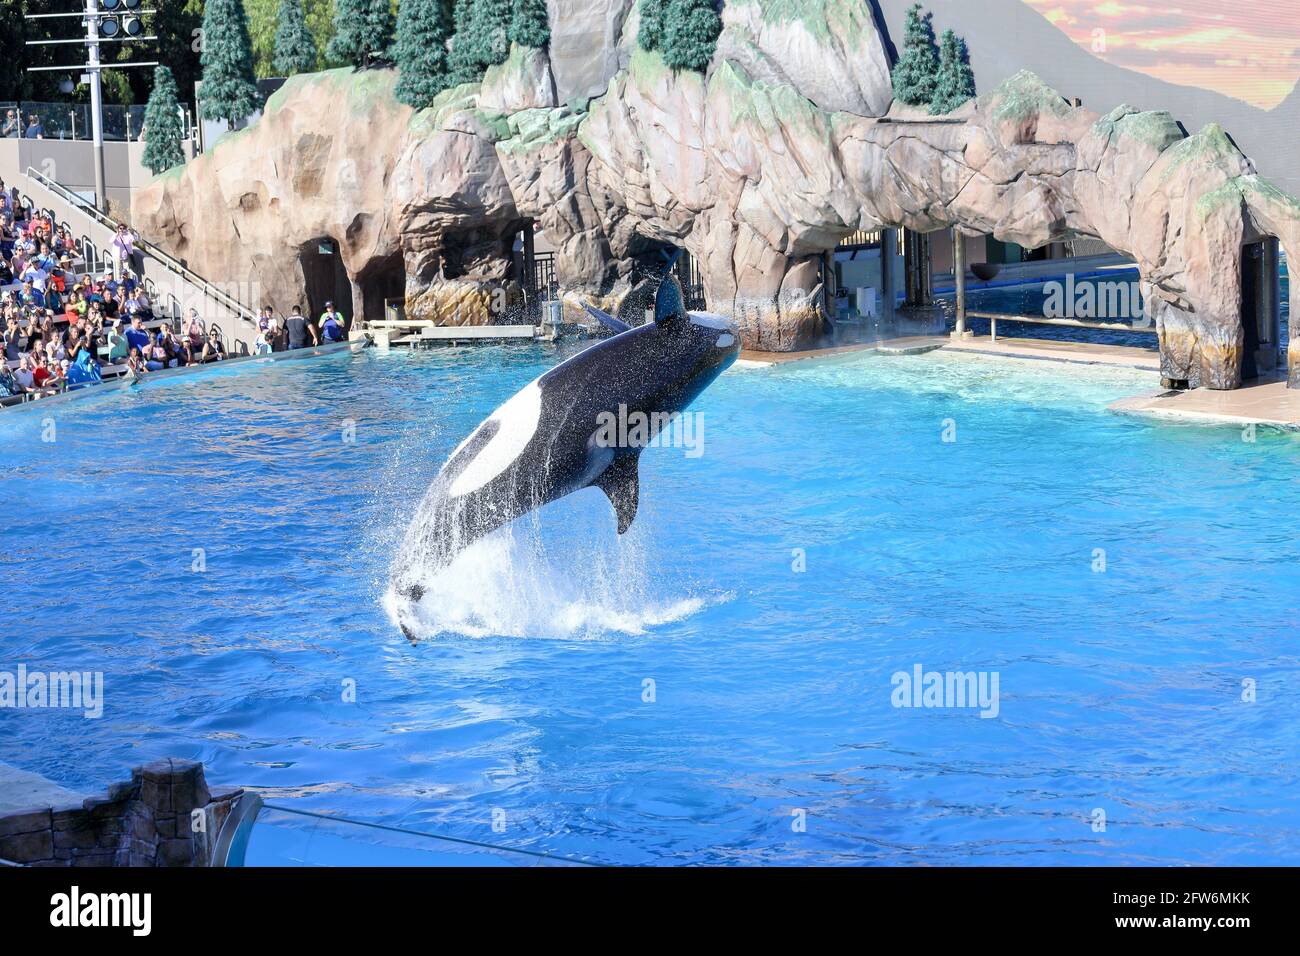 Killer whale jumping out of water during a show at Sea world, San Diego ...